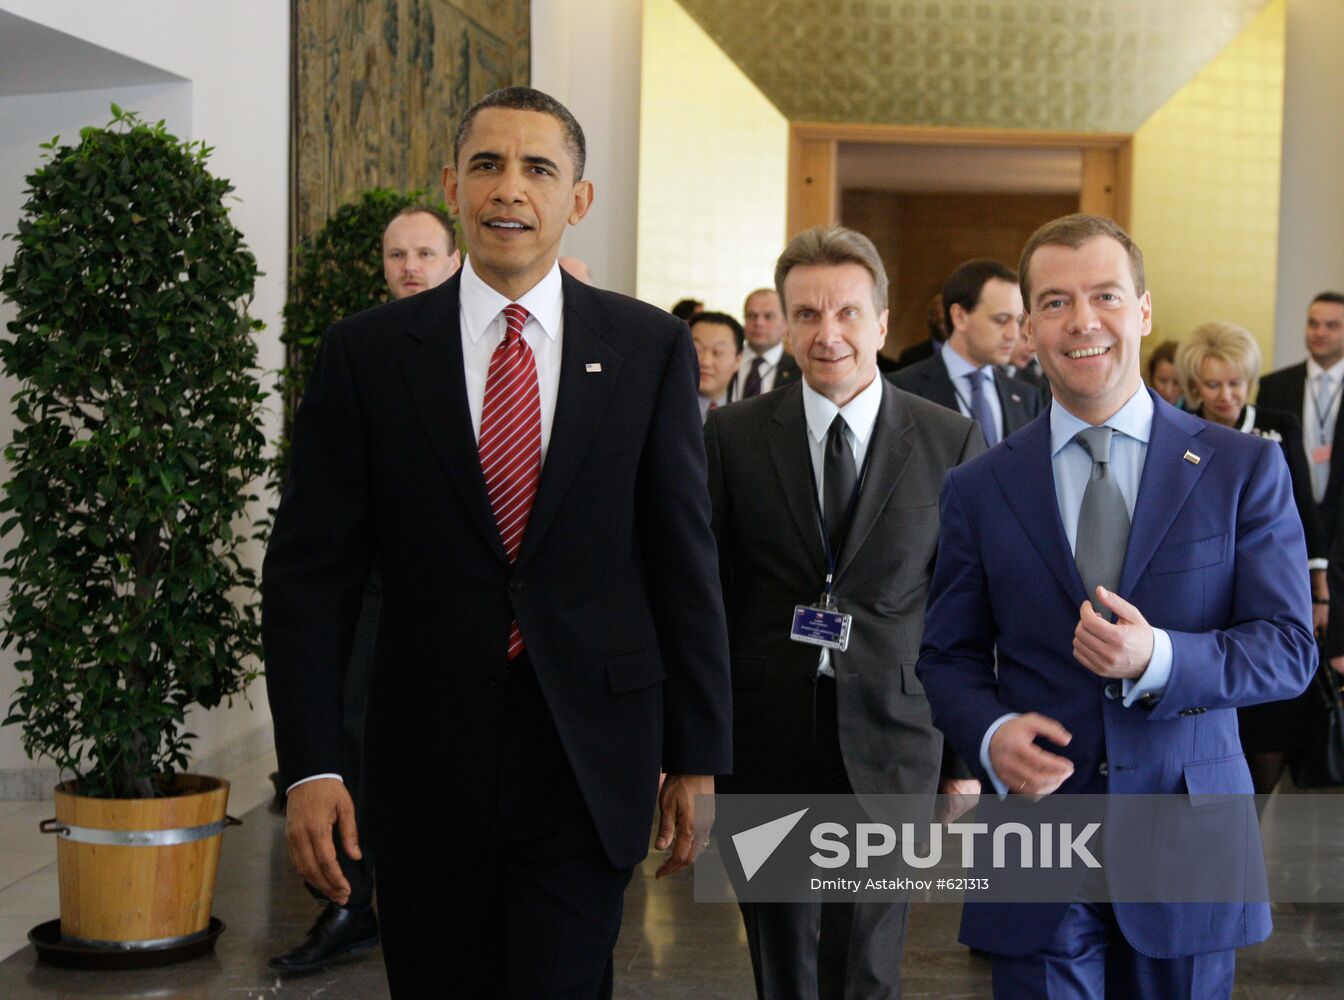 Joint press-conference by Dmitry Medvedev and Barack Obama